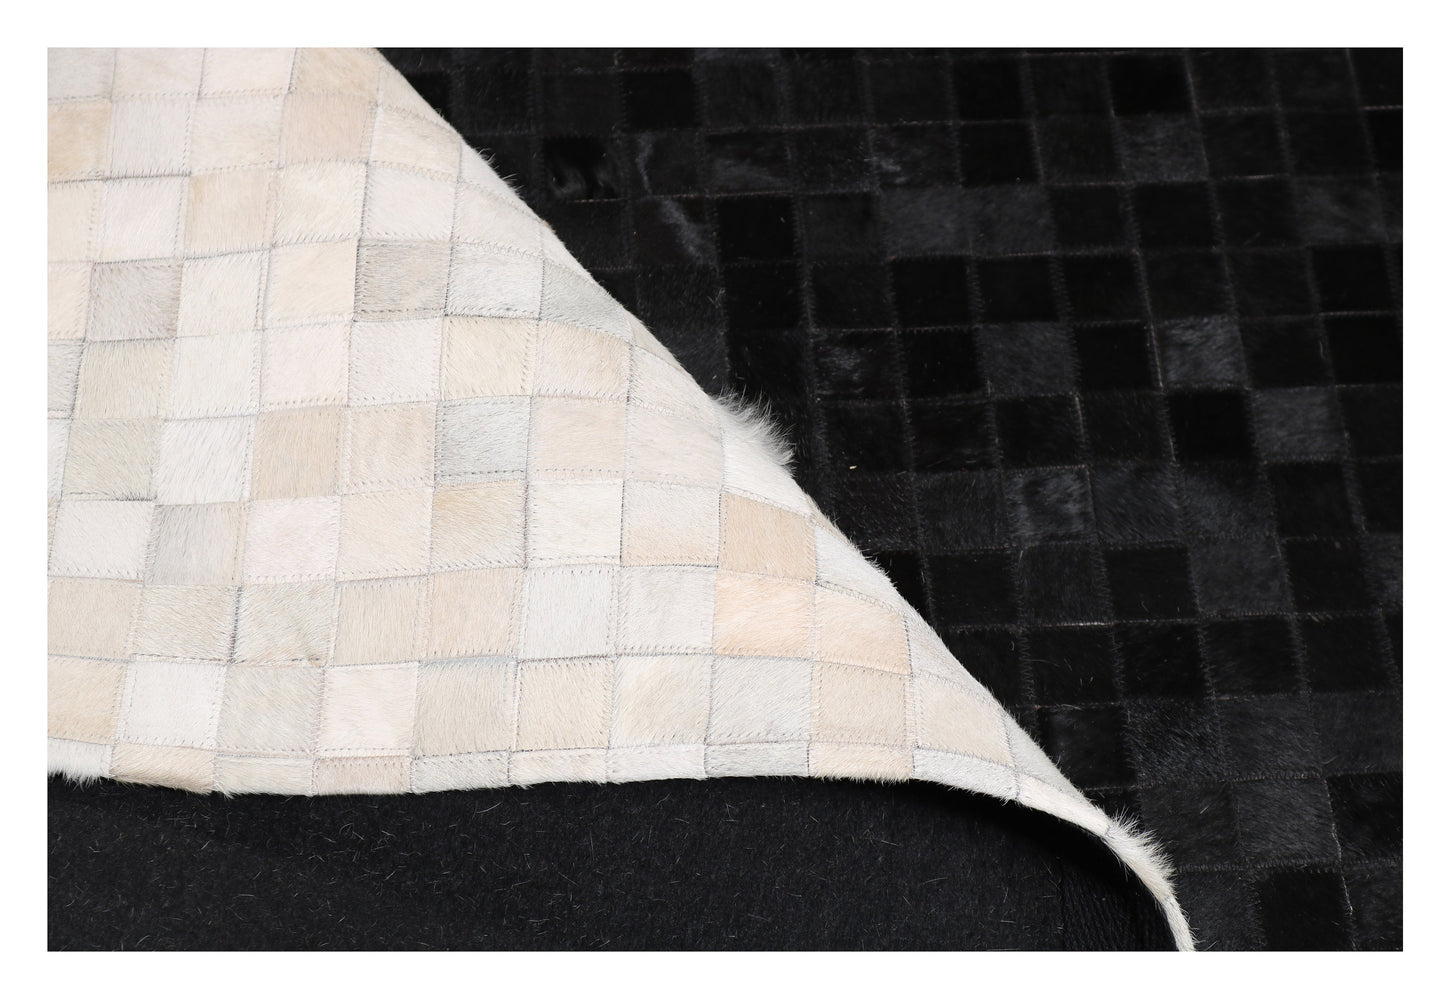 Tikul Black and White Patchwork Cowhide